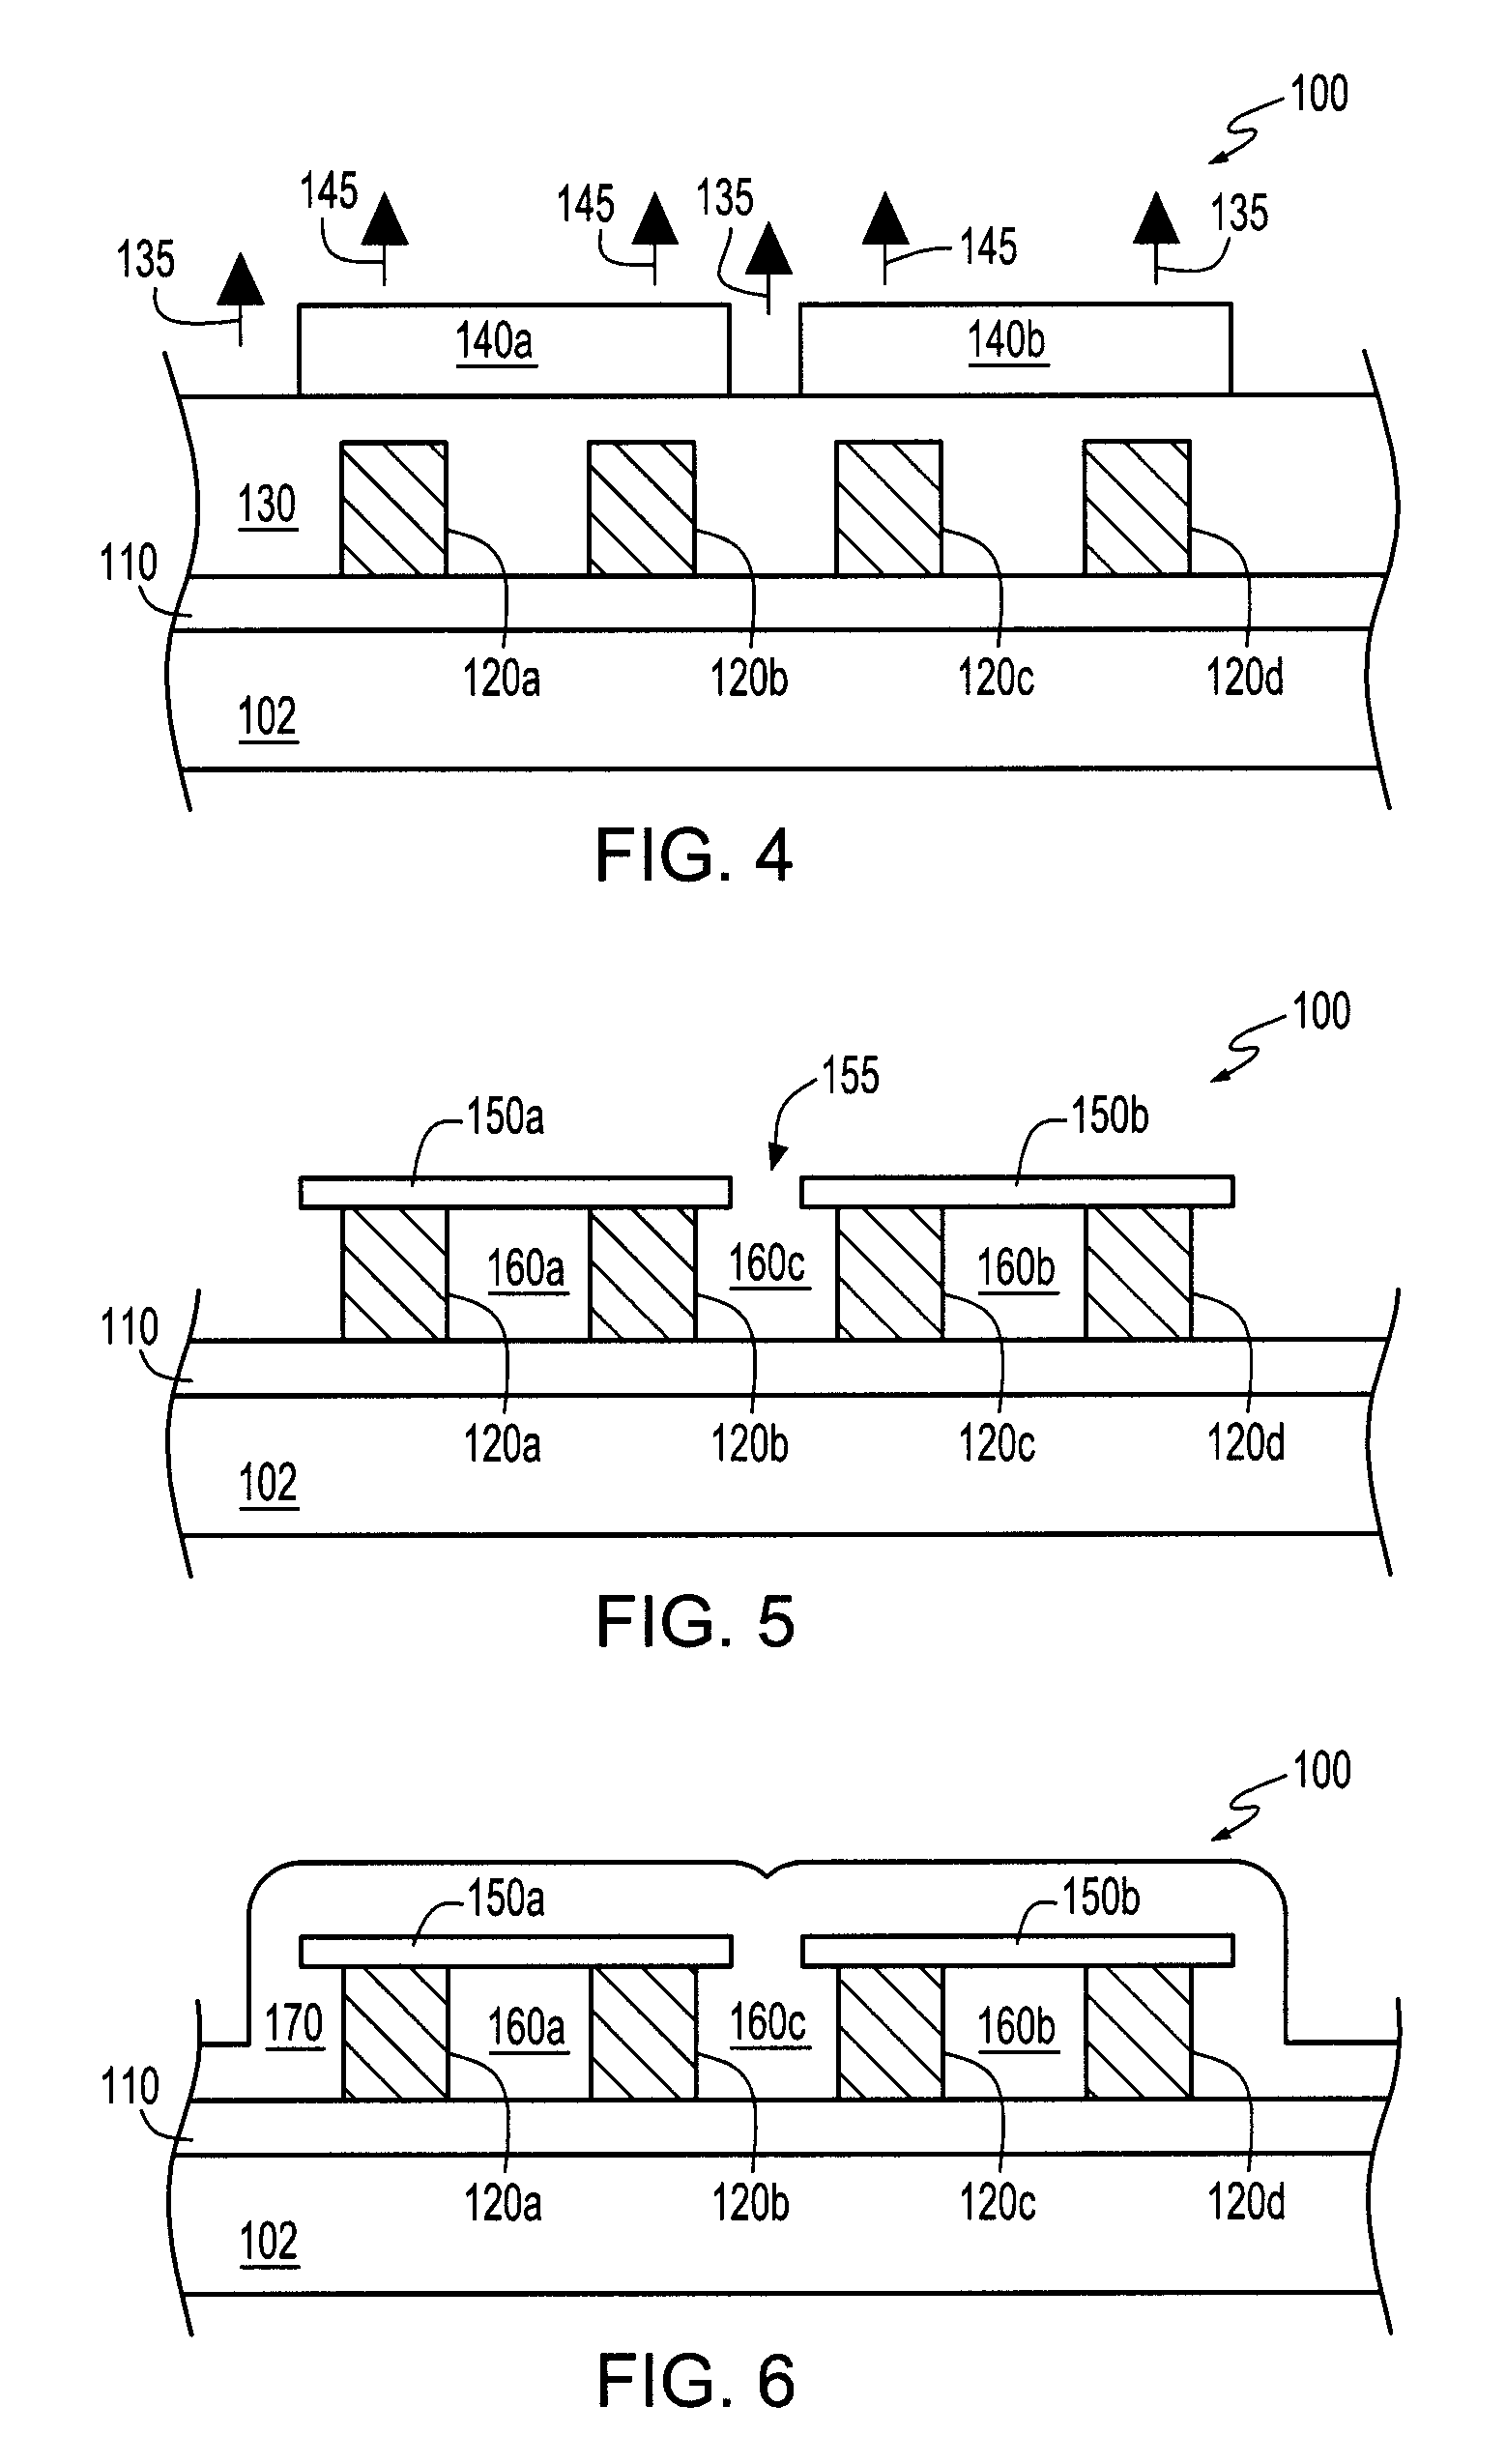 Air gap interconnect structure and method of manufacture